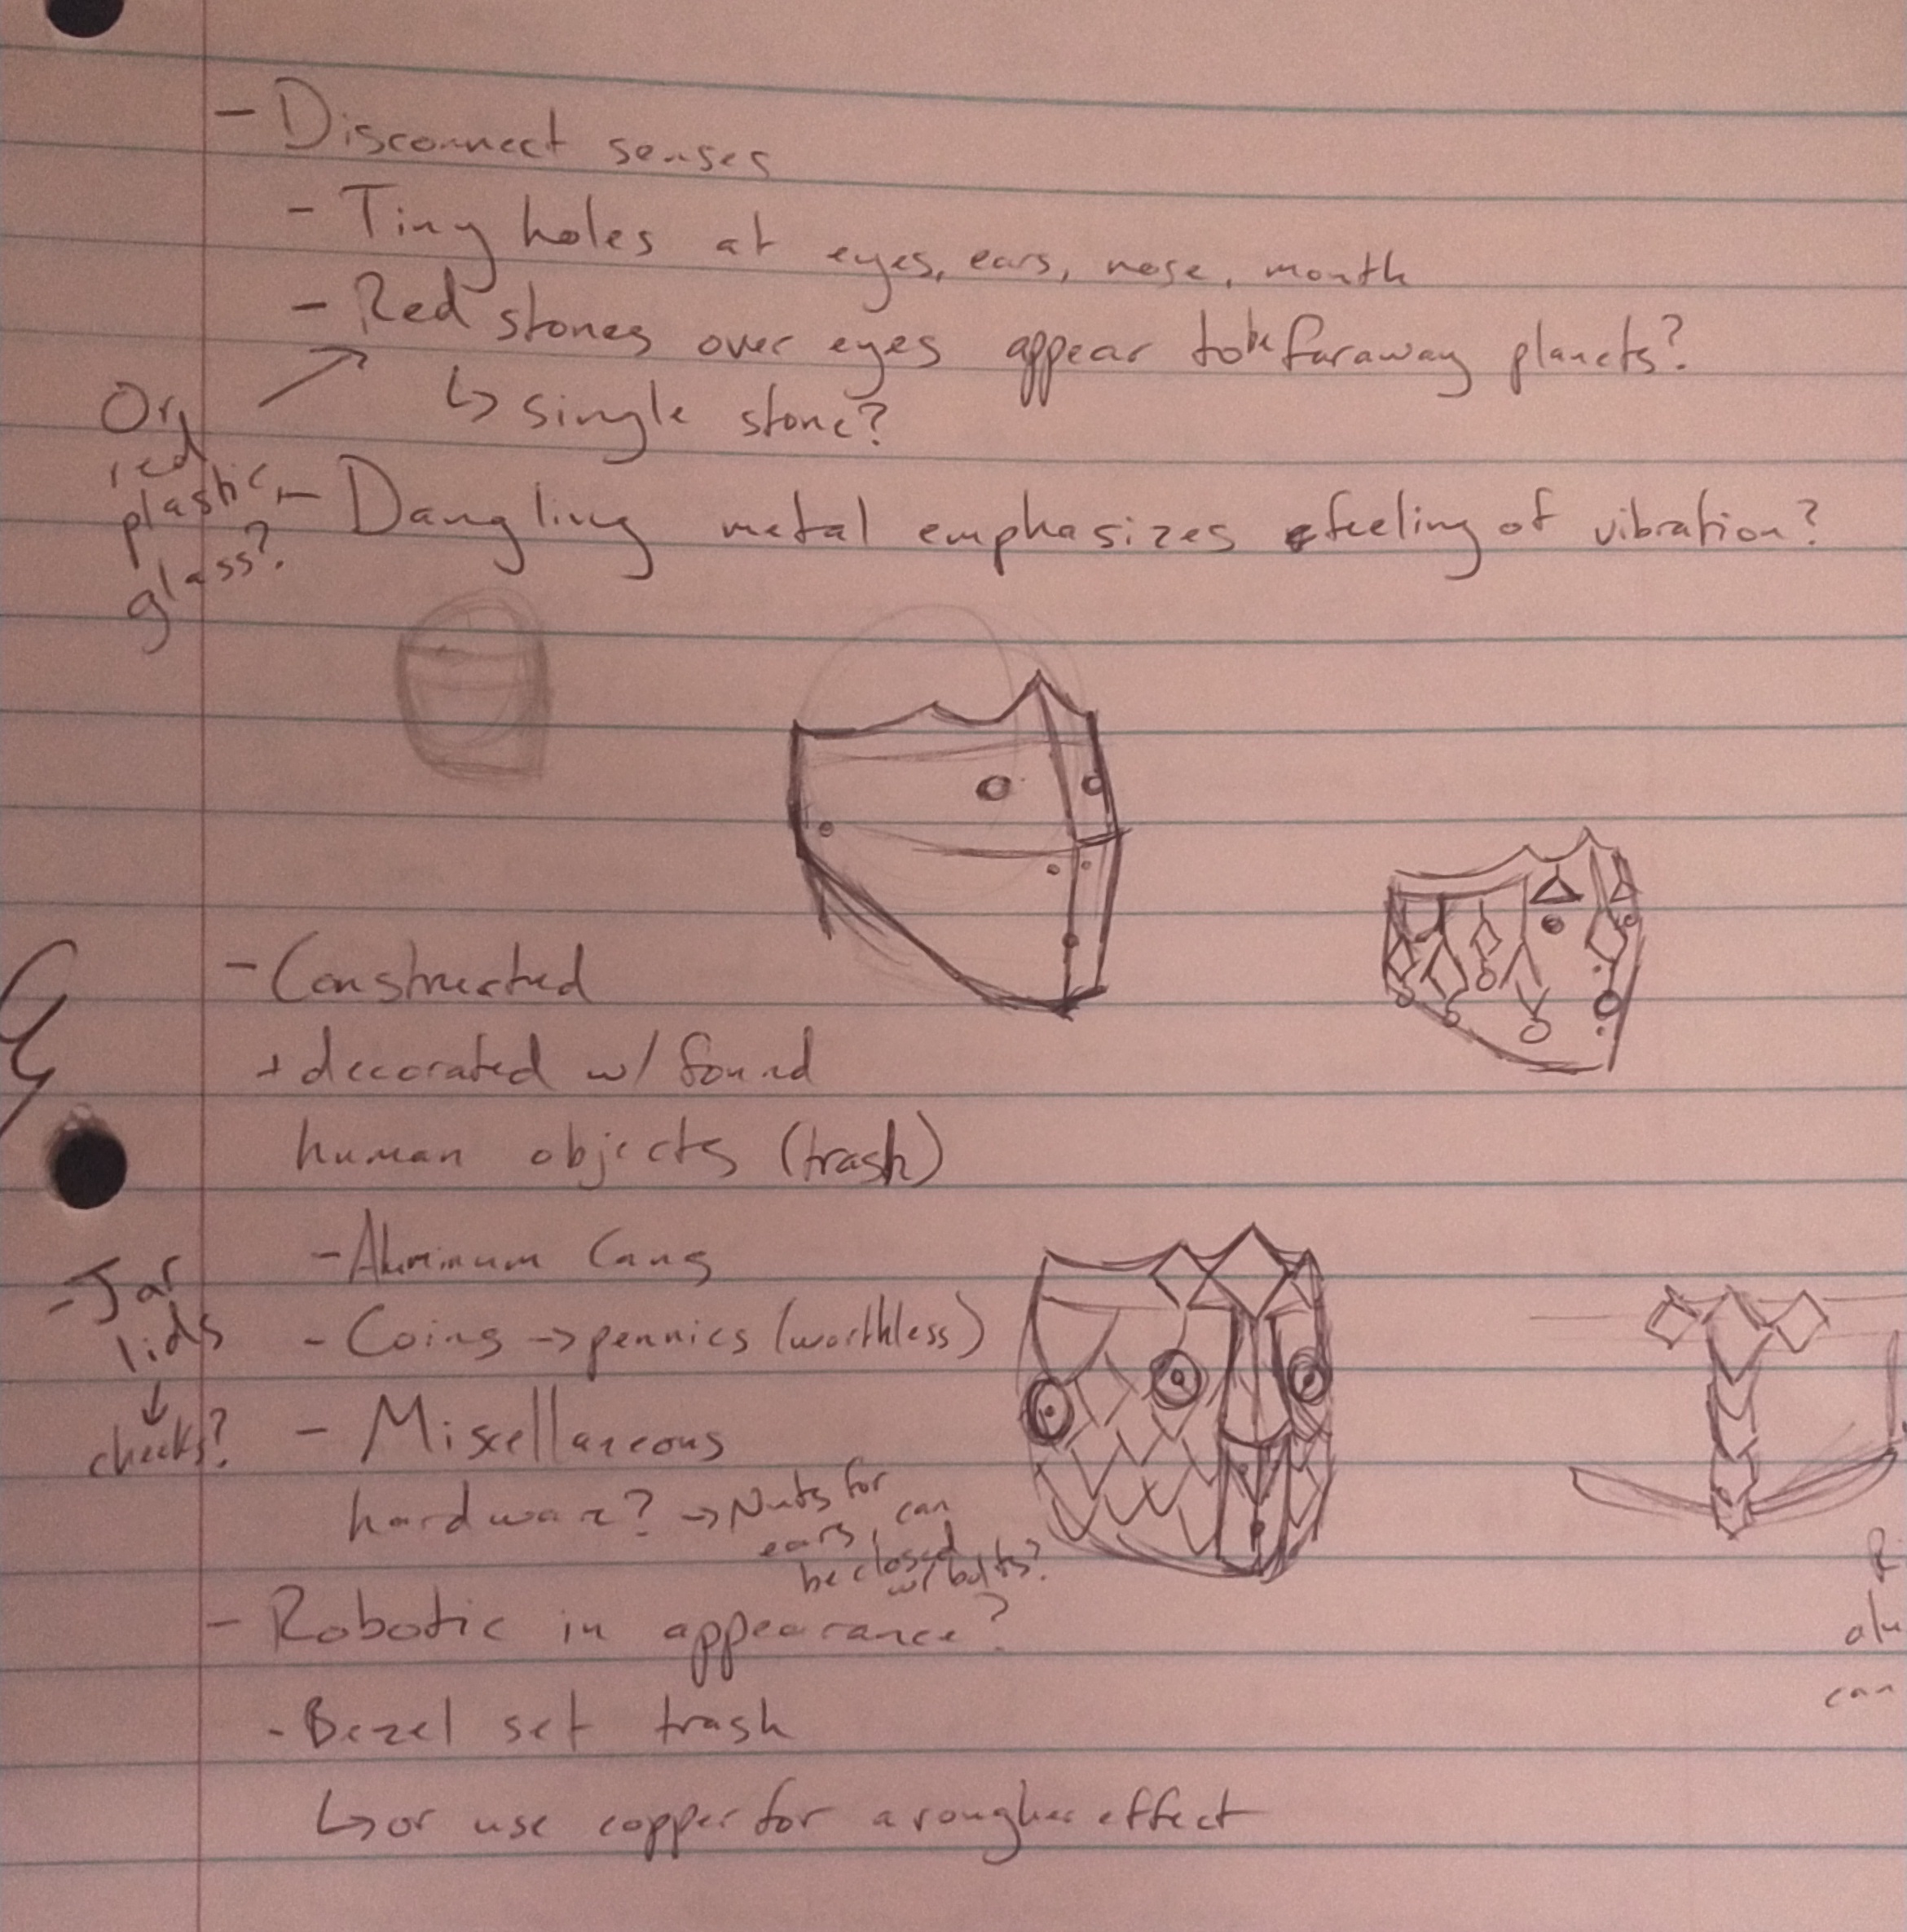 Rough drawings and notes for a mask. It is to be made from scrap materials and should limit the senses when worn.